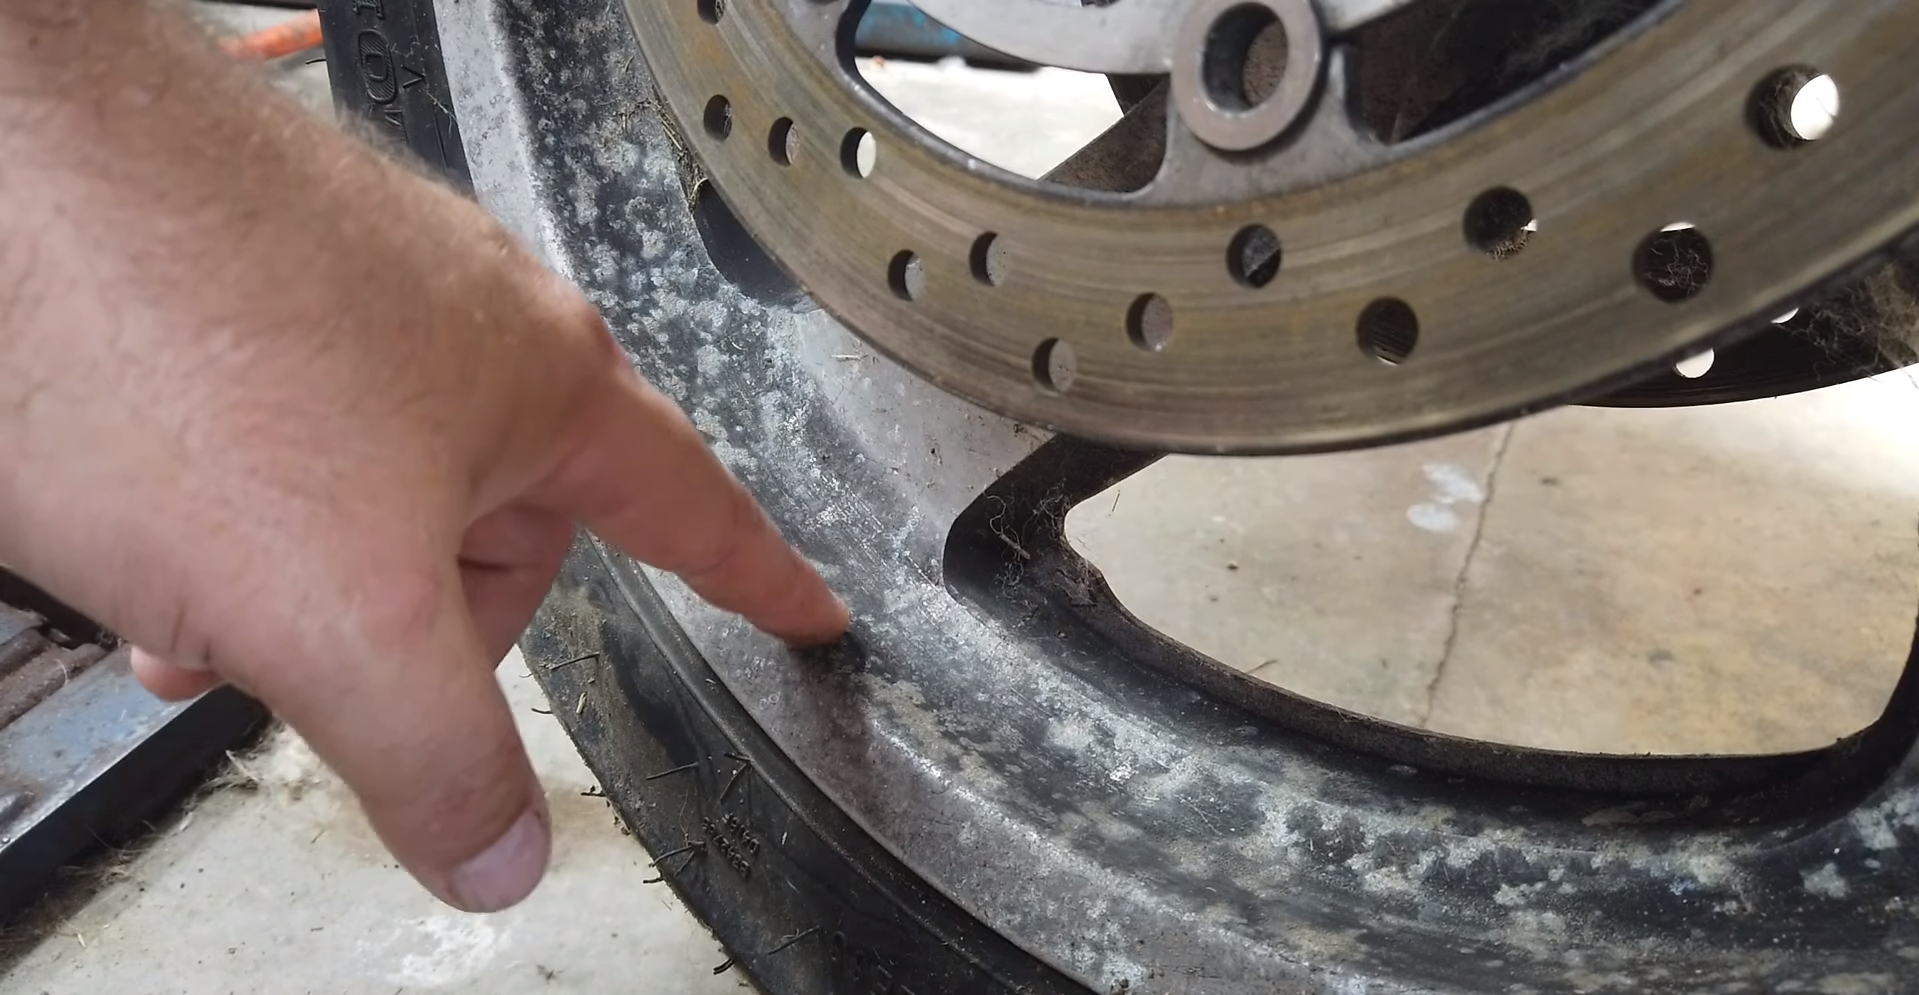 The best method for cleaning aluminum wheels